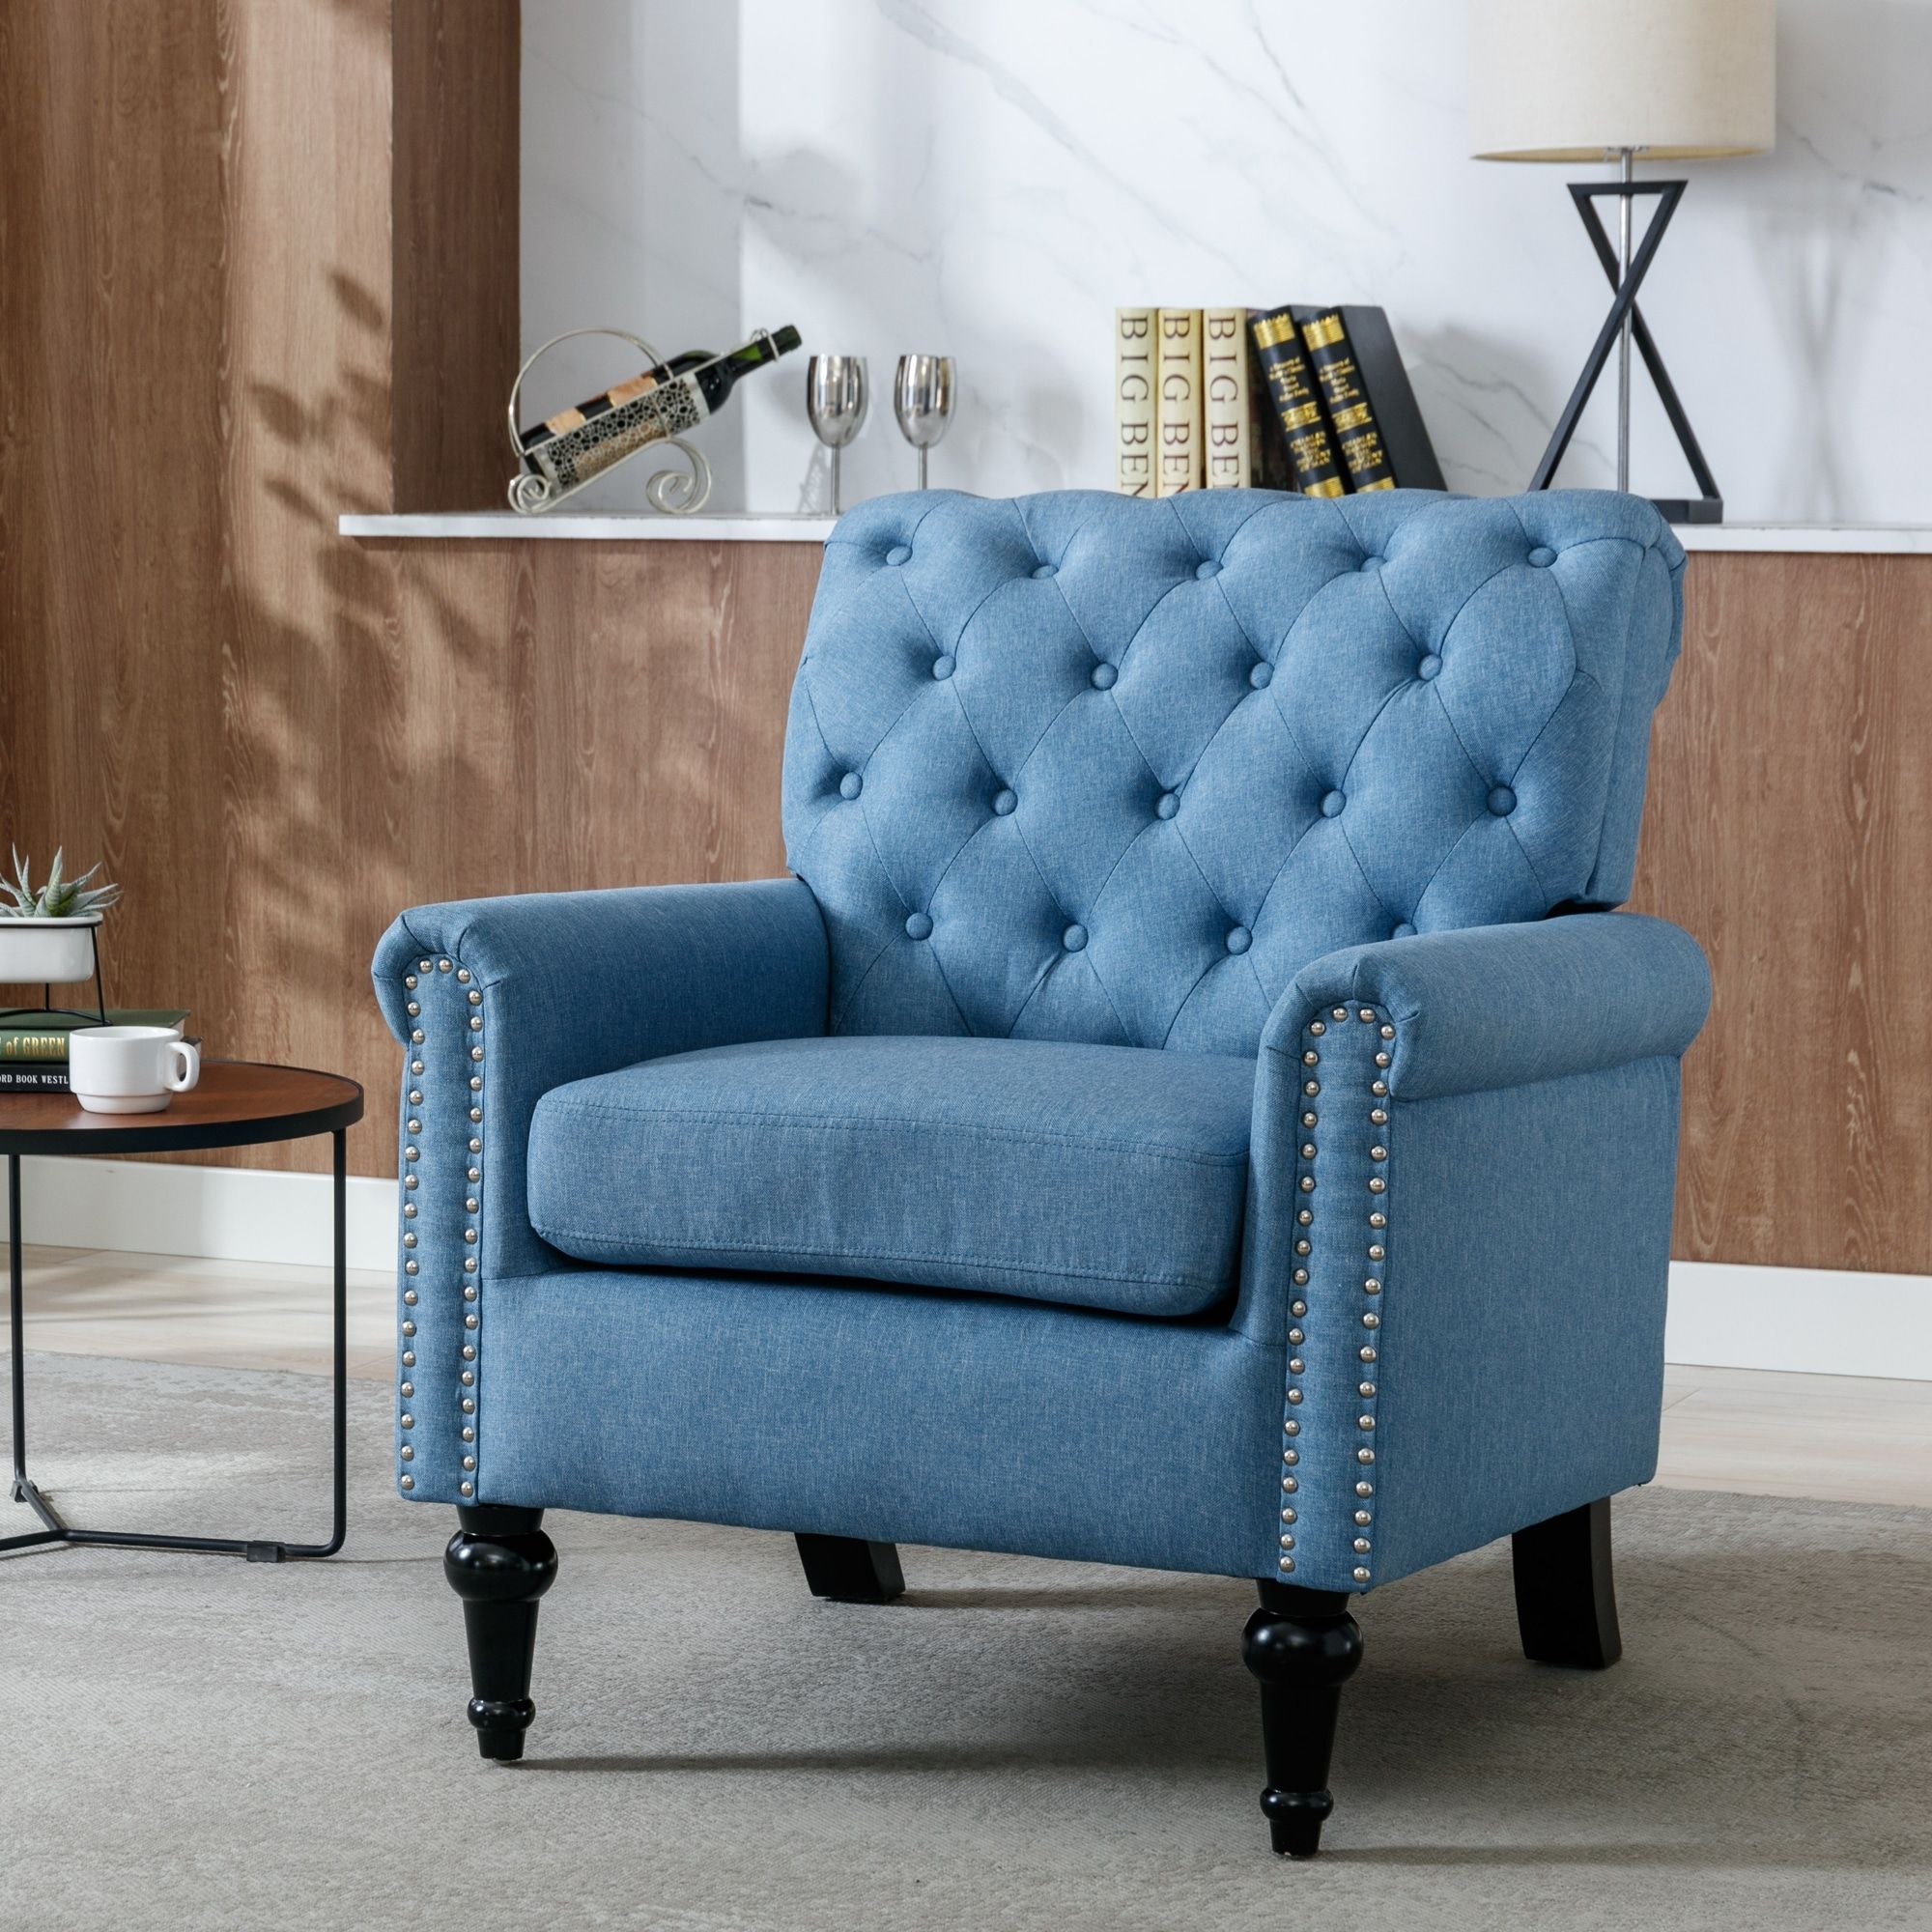 Tufted Upholstered Accent Chairs Single Sofa Chair For Livingroom With  Linen Fabric Armchairs Comfy Reading Chair – Bed Bath & Beyond – 38047189 Intended For Comfy Reading Armchairs (View 5 of 15)